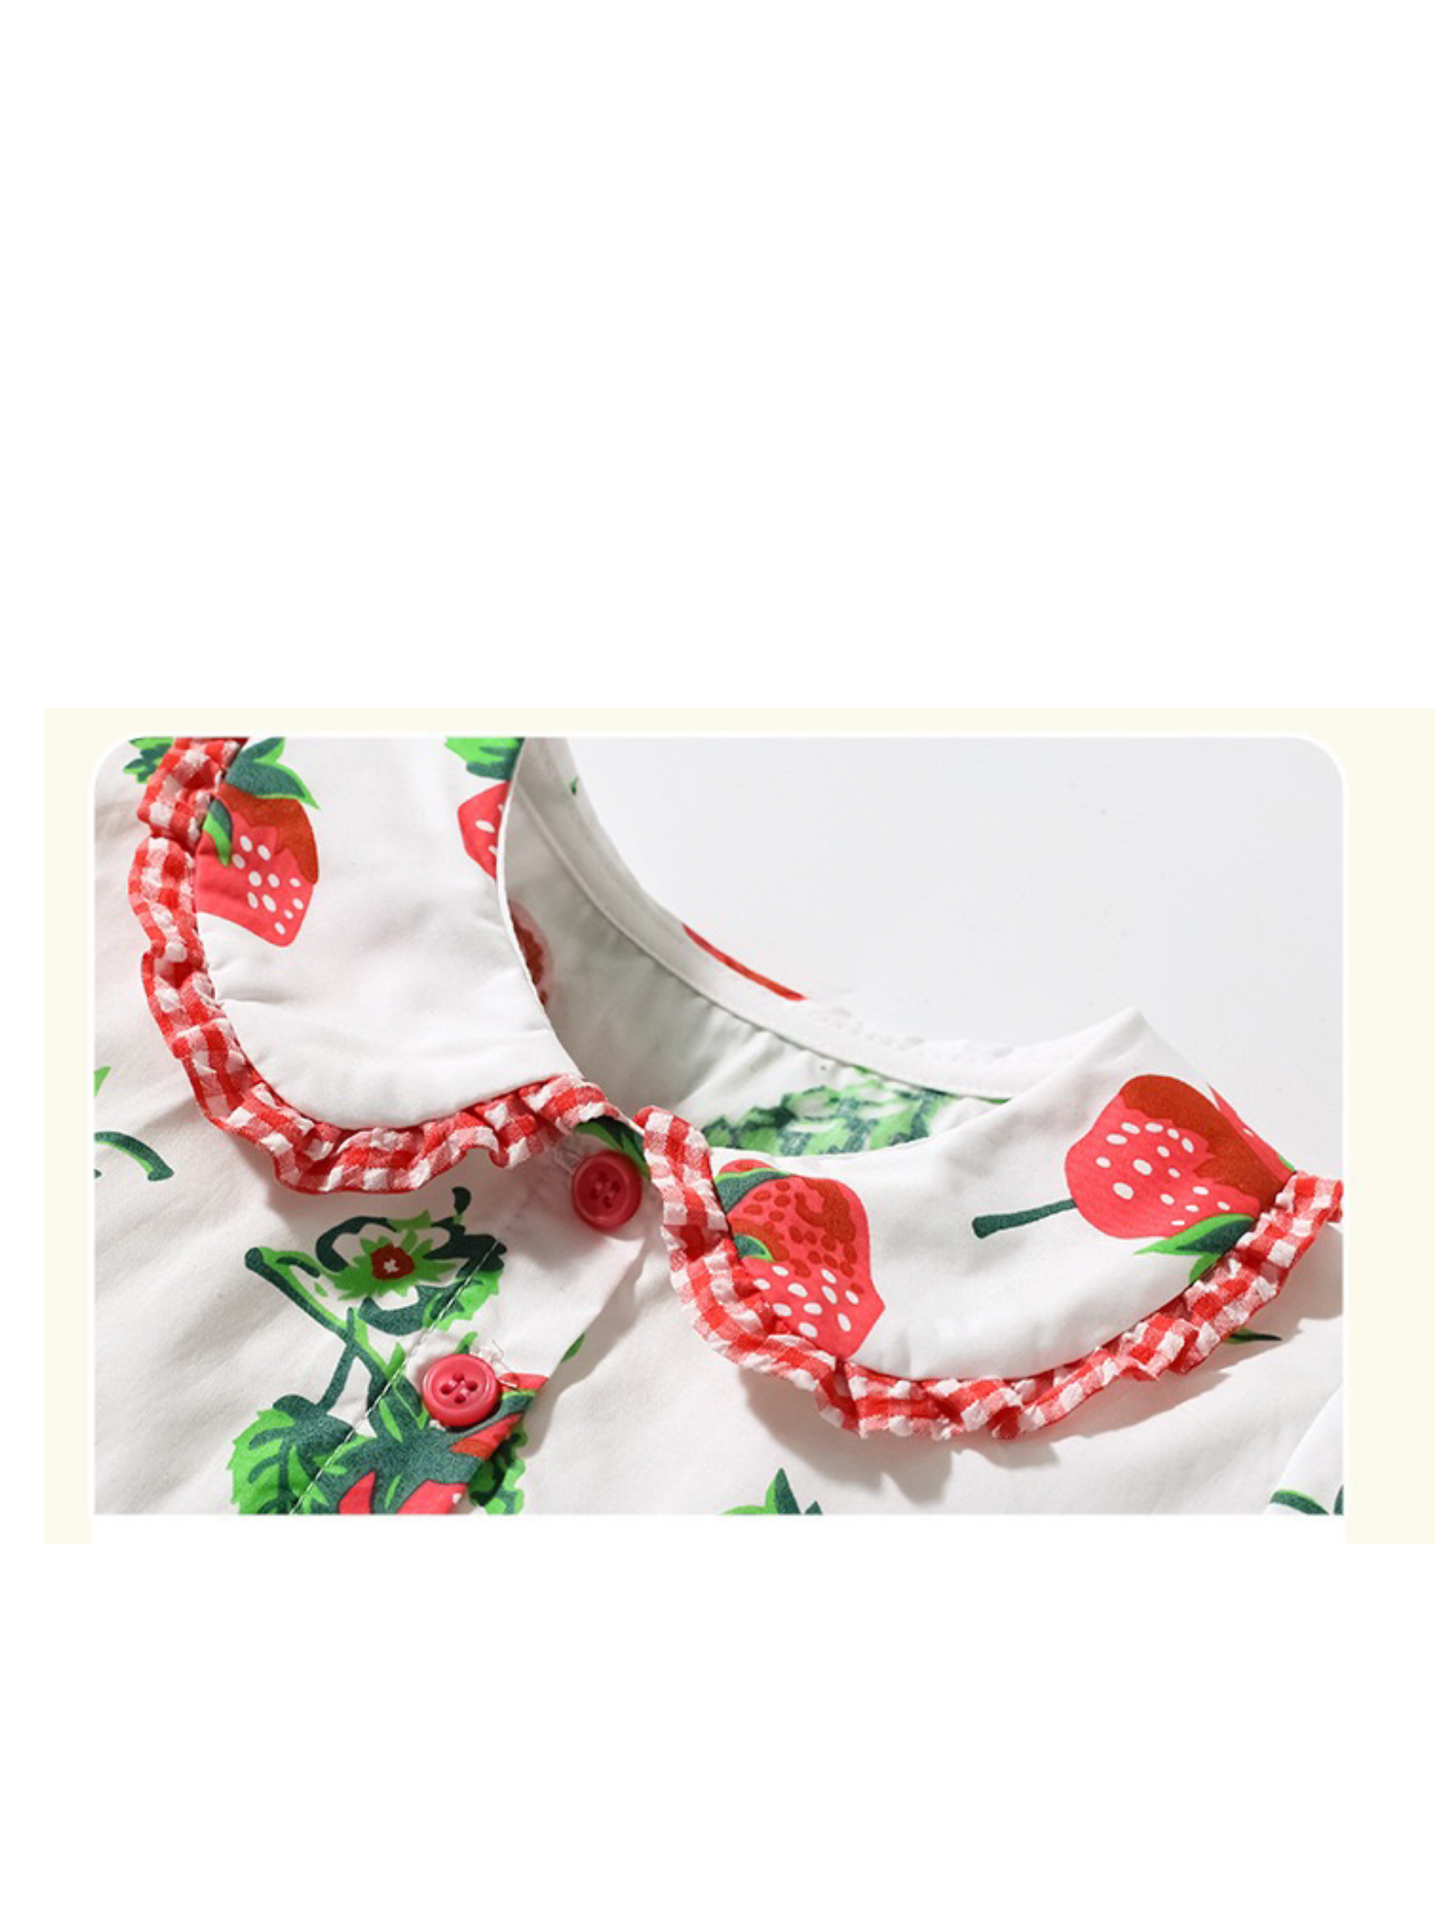 strawberry Dress (5,6,7 years old ONLY)